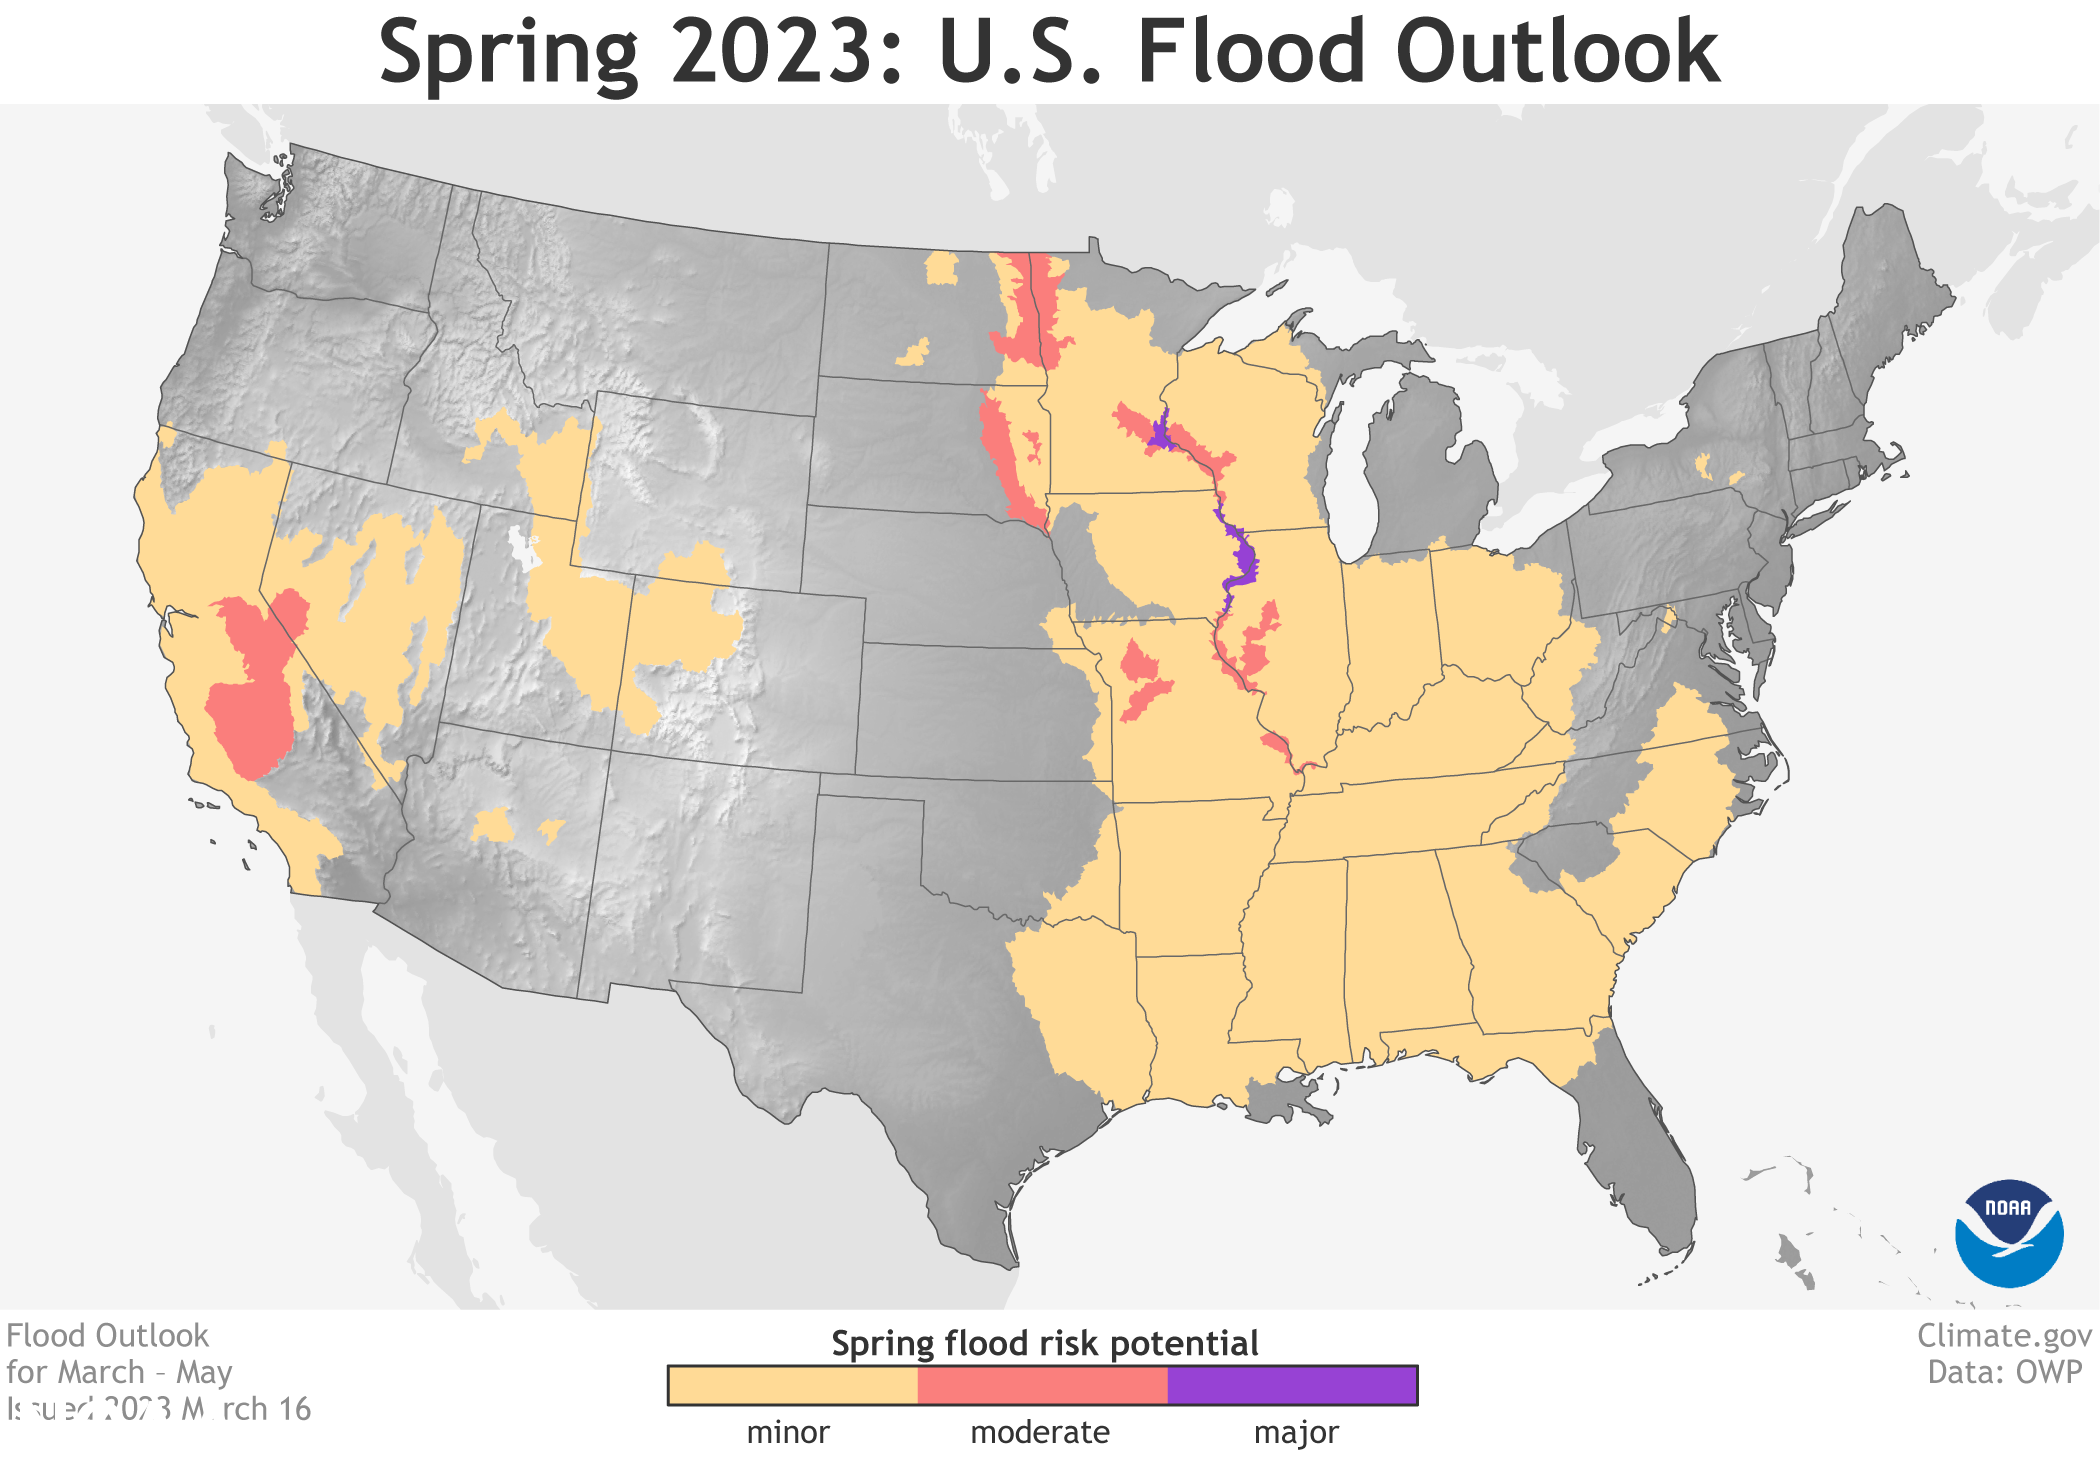 Map depicting locations in the U.S. where there is a greater than 50% chance of minor to major flooding during March through May (image credit: NOAA)